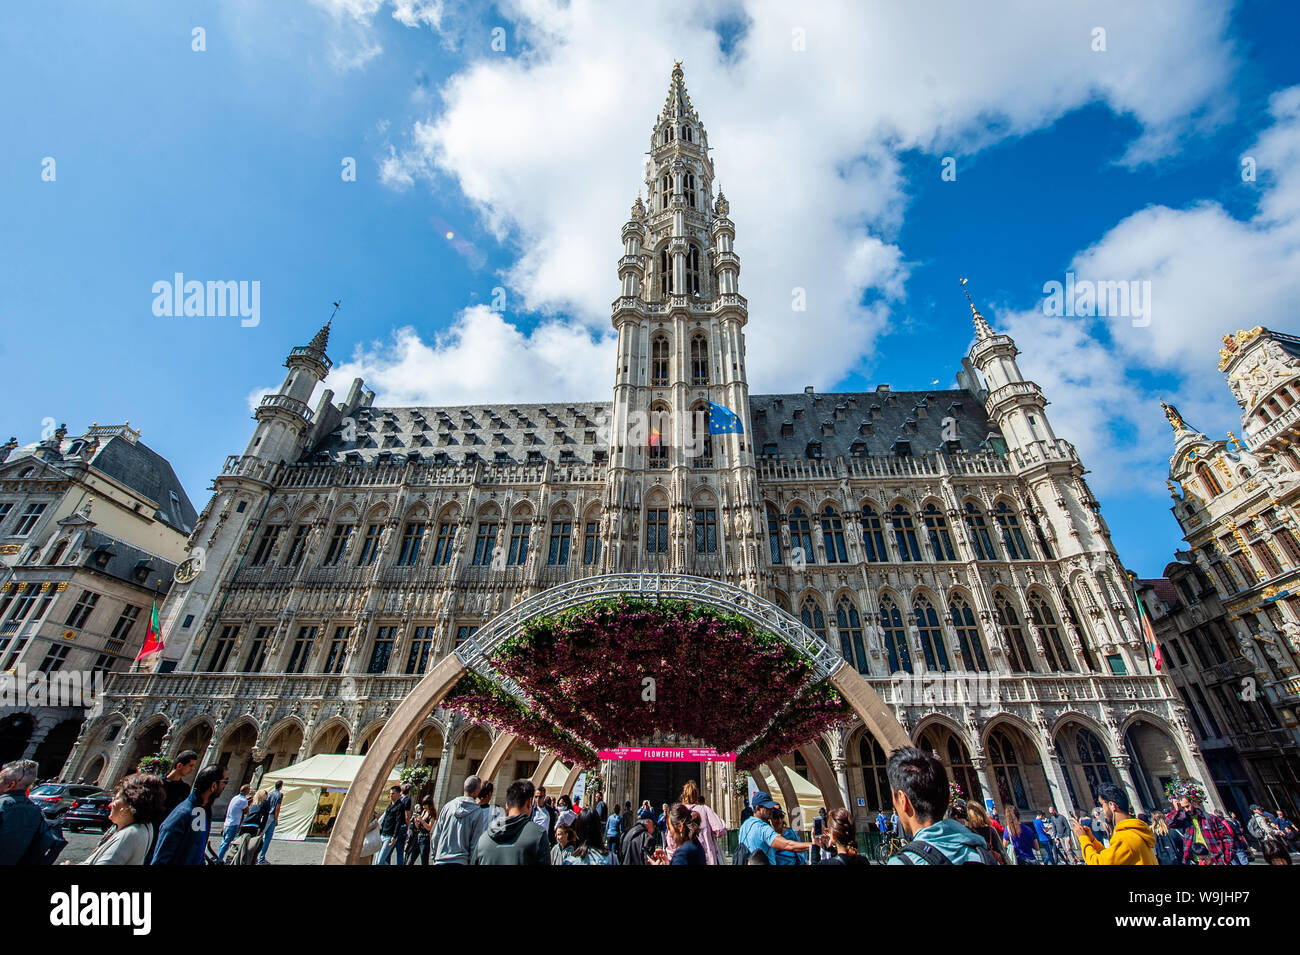 Brussels, North Brabant, Belgium. 14th Aug, 2019. An exterior view of the city hall decorated with a flower arch composed of 500 fuchsias during the event.Flower time is a biennial initiative that was launched in 2013 by the City of Brussels and the ASBL (non-profit organization) Tapis de Fleurs de Bruxelles. Under the theme 'A World of Floral Emotions', more than 30 top florists from 13 countries decorated the magnificent rooms of Brussels City Hall, a Unesco masterpiece of Gothic architecture. Brussels' famous Grand Place hosted for the occasion a stunning flower arch composed of 500 fuc Stock Photo